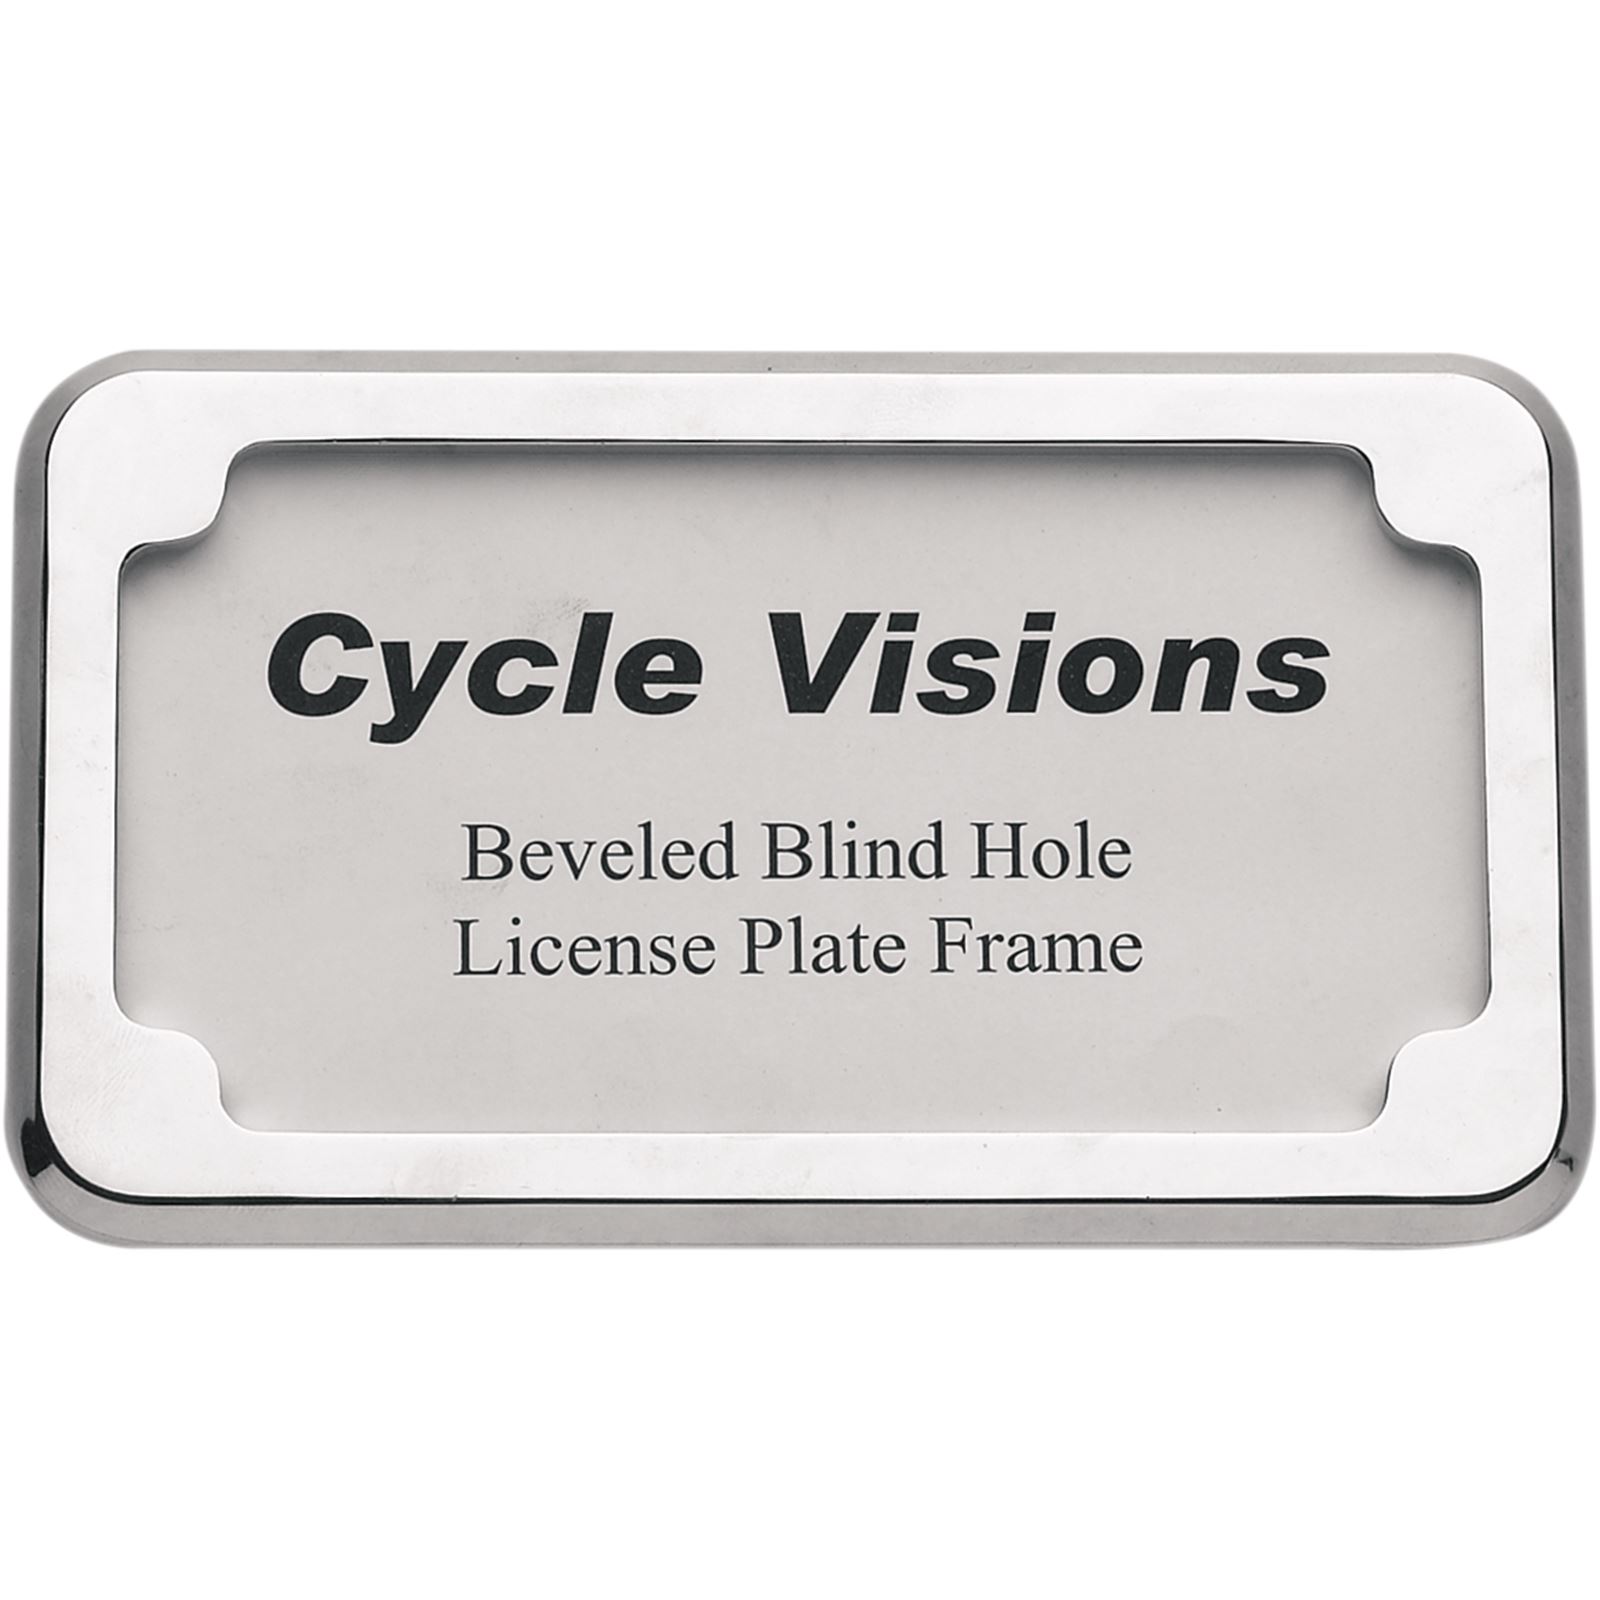 Cycle Visions Beveled License Plate Frame - Chrome